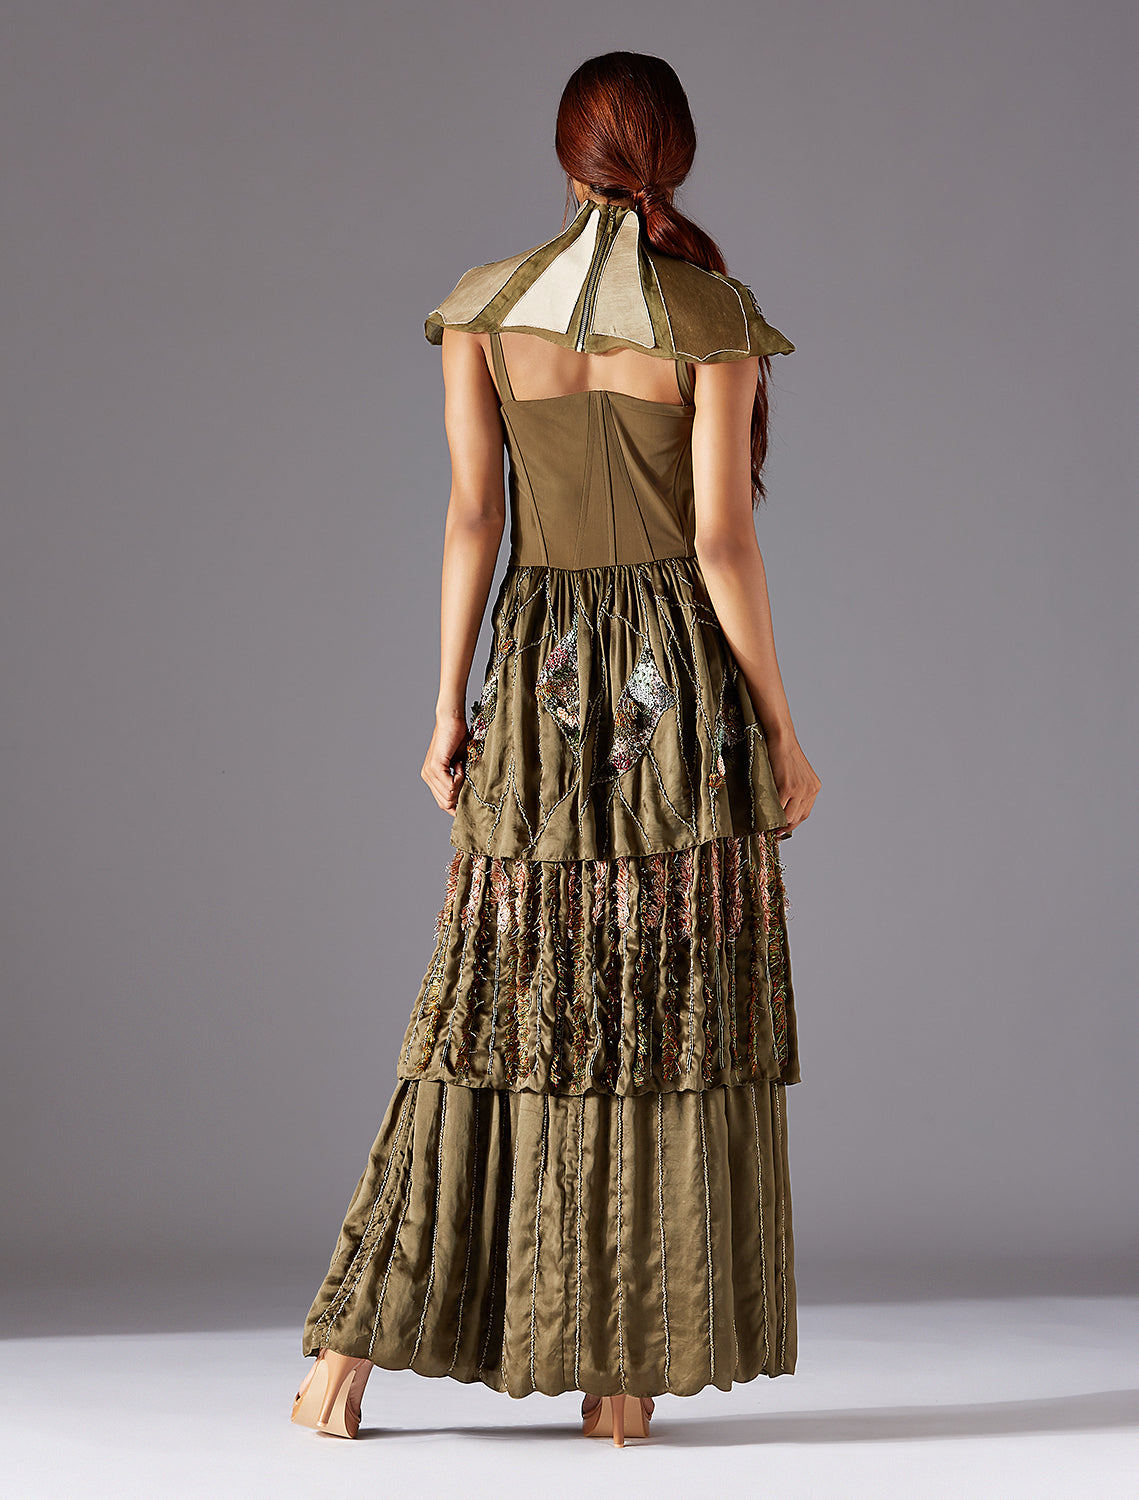 Topiary Corset Gown with Puzzle Shoulder Sash